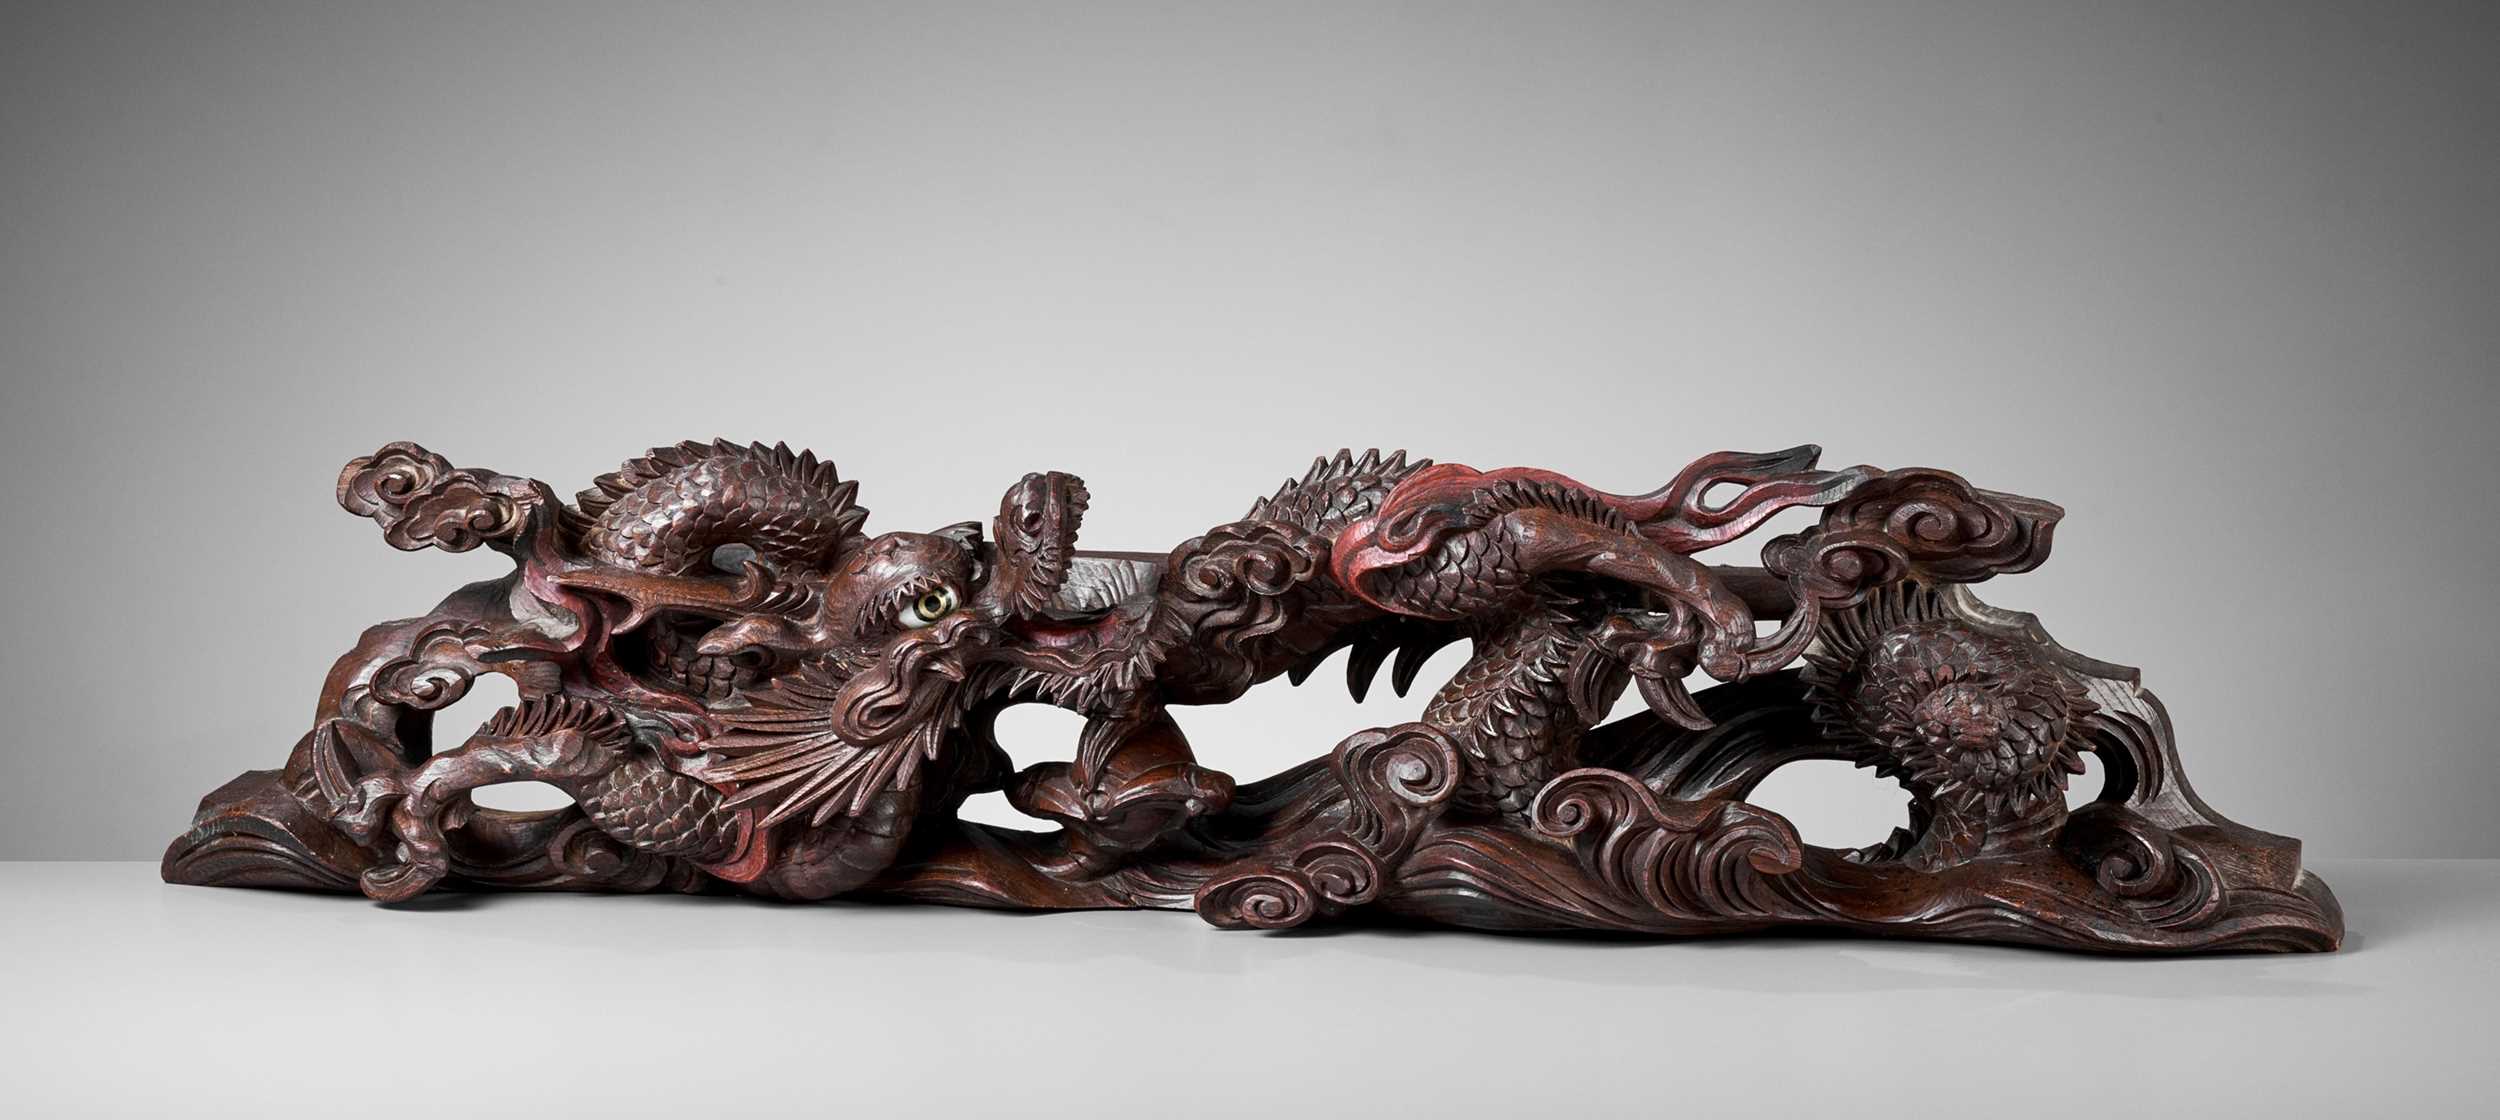 Lot 84 - A LARGE CARVED AND PAINTED WOOD ARCHITECTURAL ELEMENT WITH A DRAGON